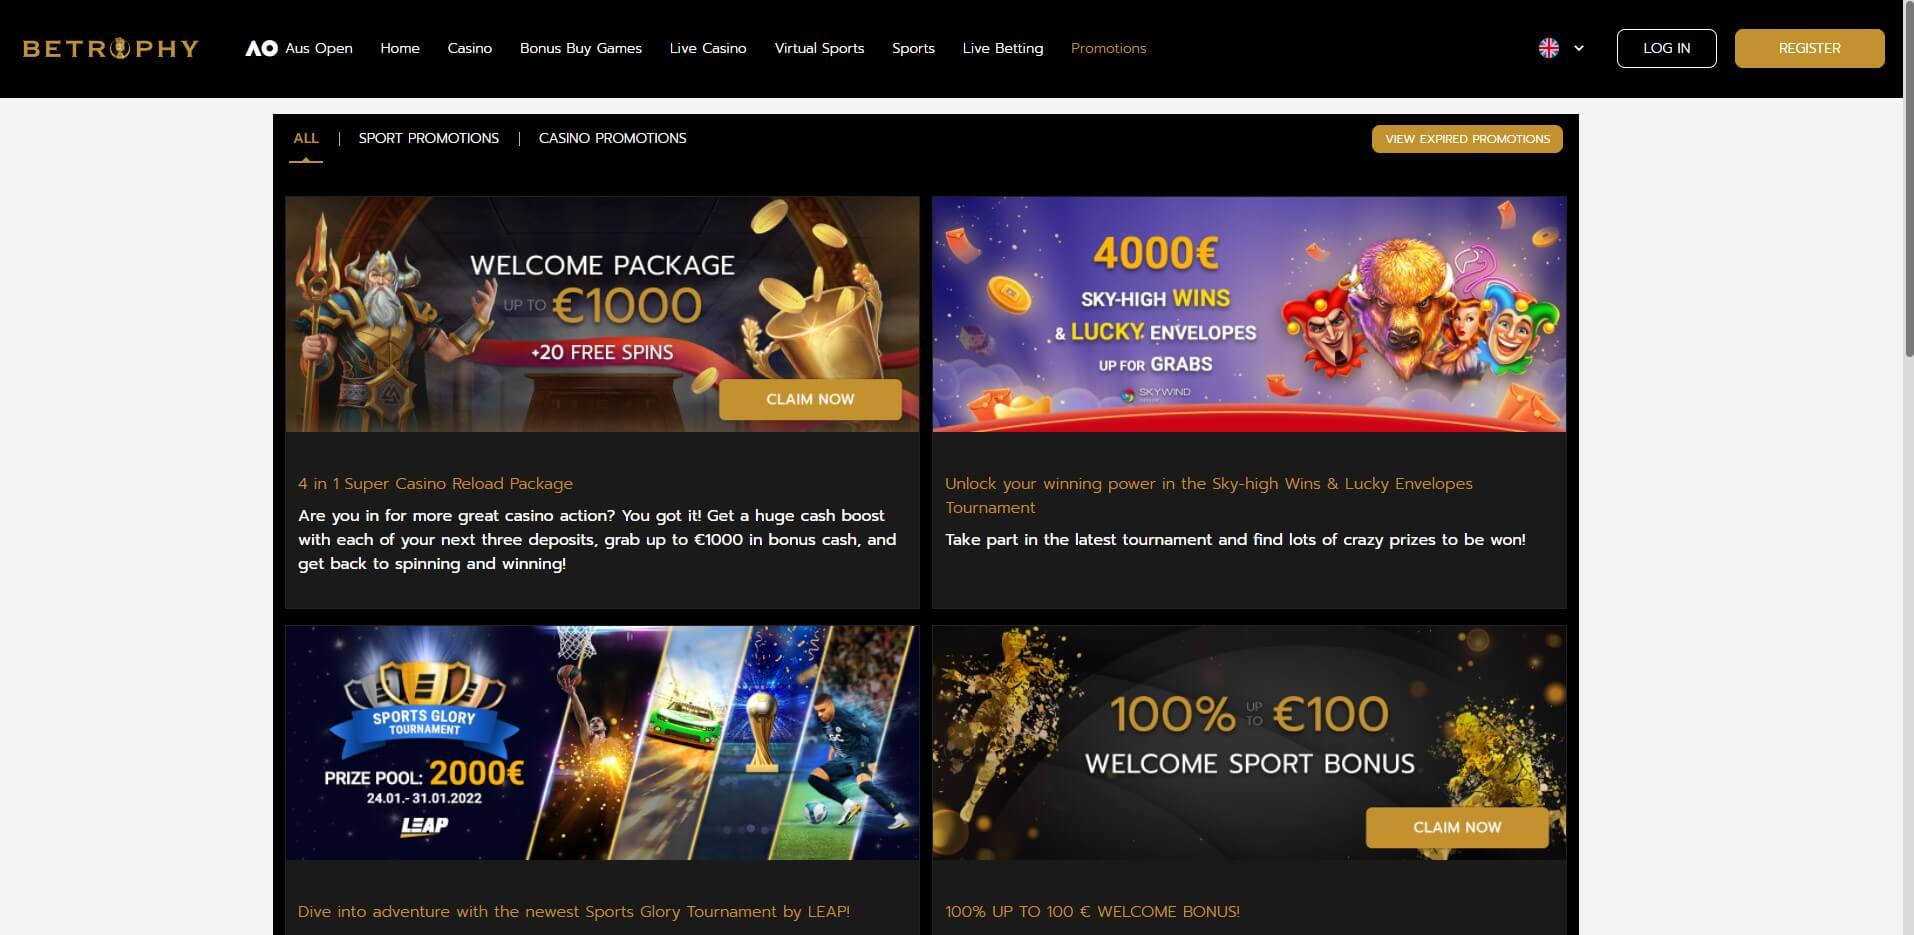 Promotions at Betrophy Casino